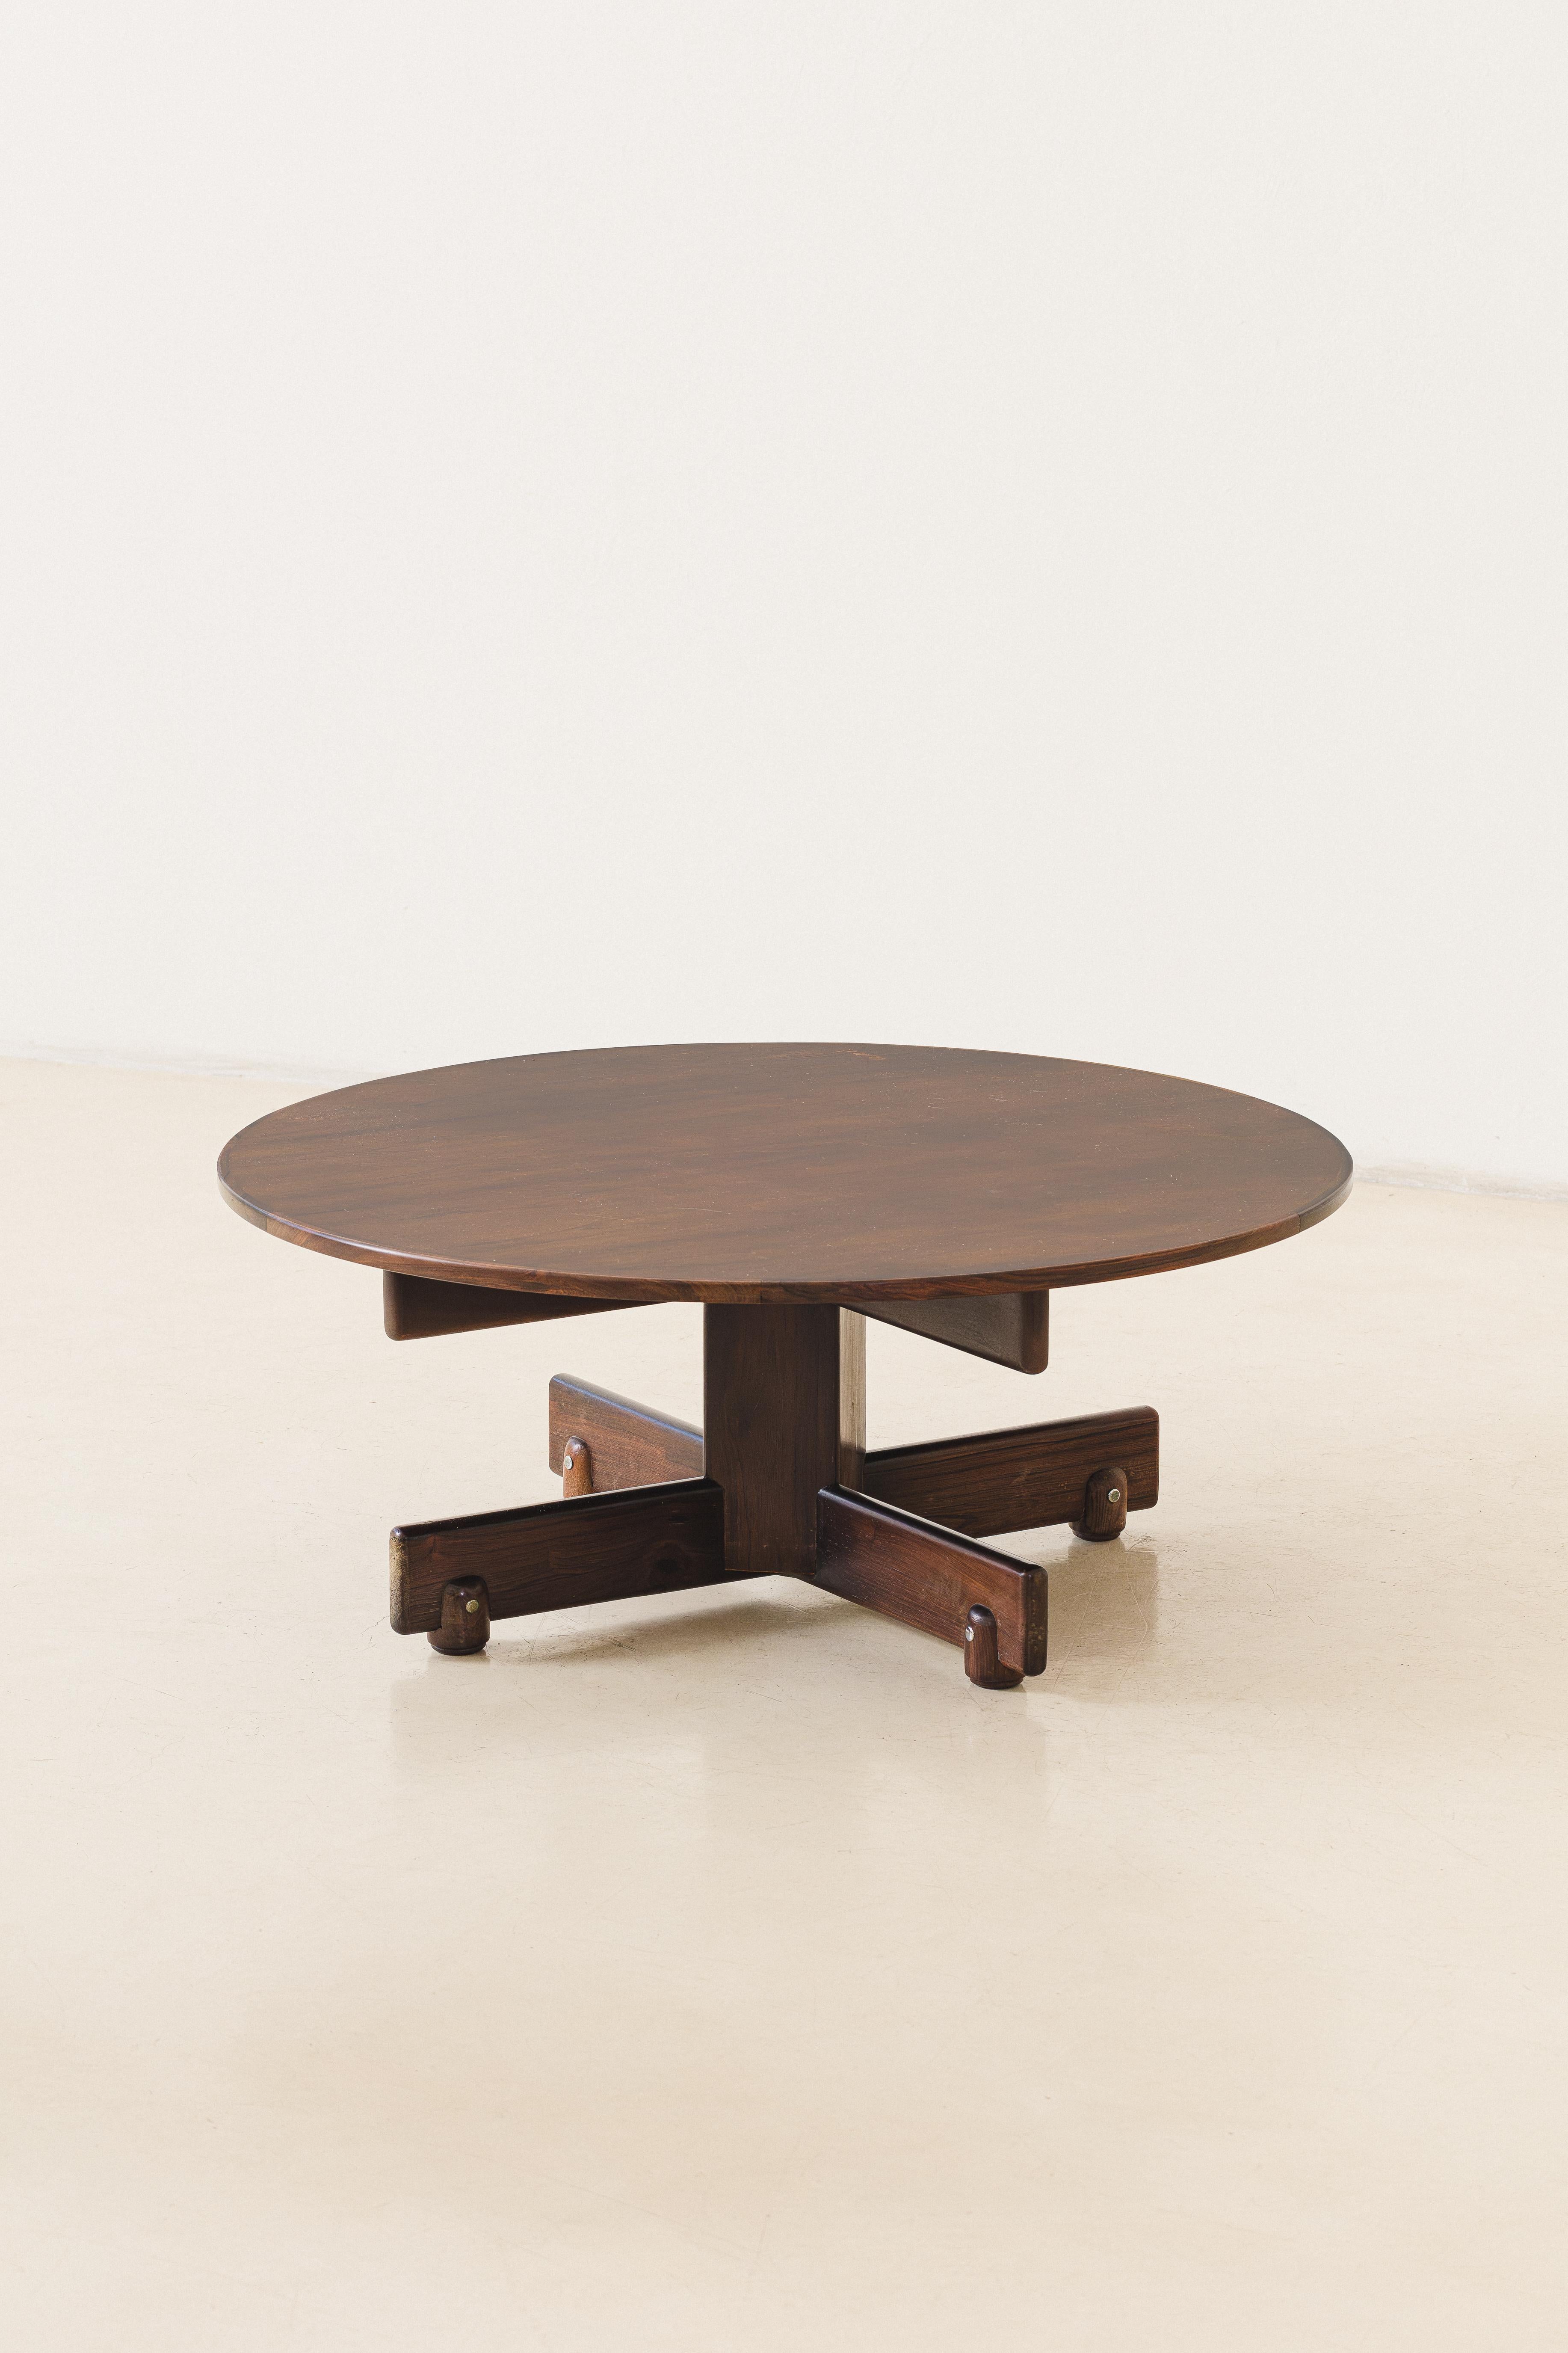 Brazilian Solid Rosewood Alex Coffee Table Design by Sergio Rodrigues, Oca, Brazil, 1960.  For Sale